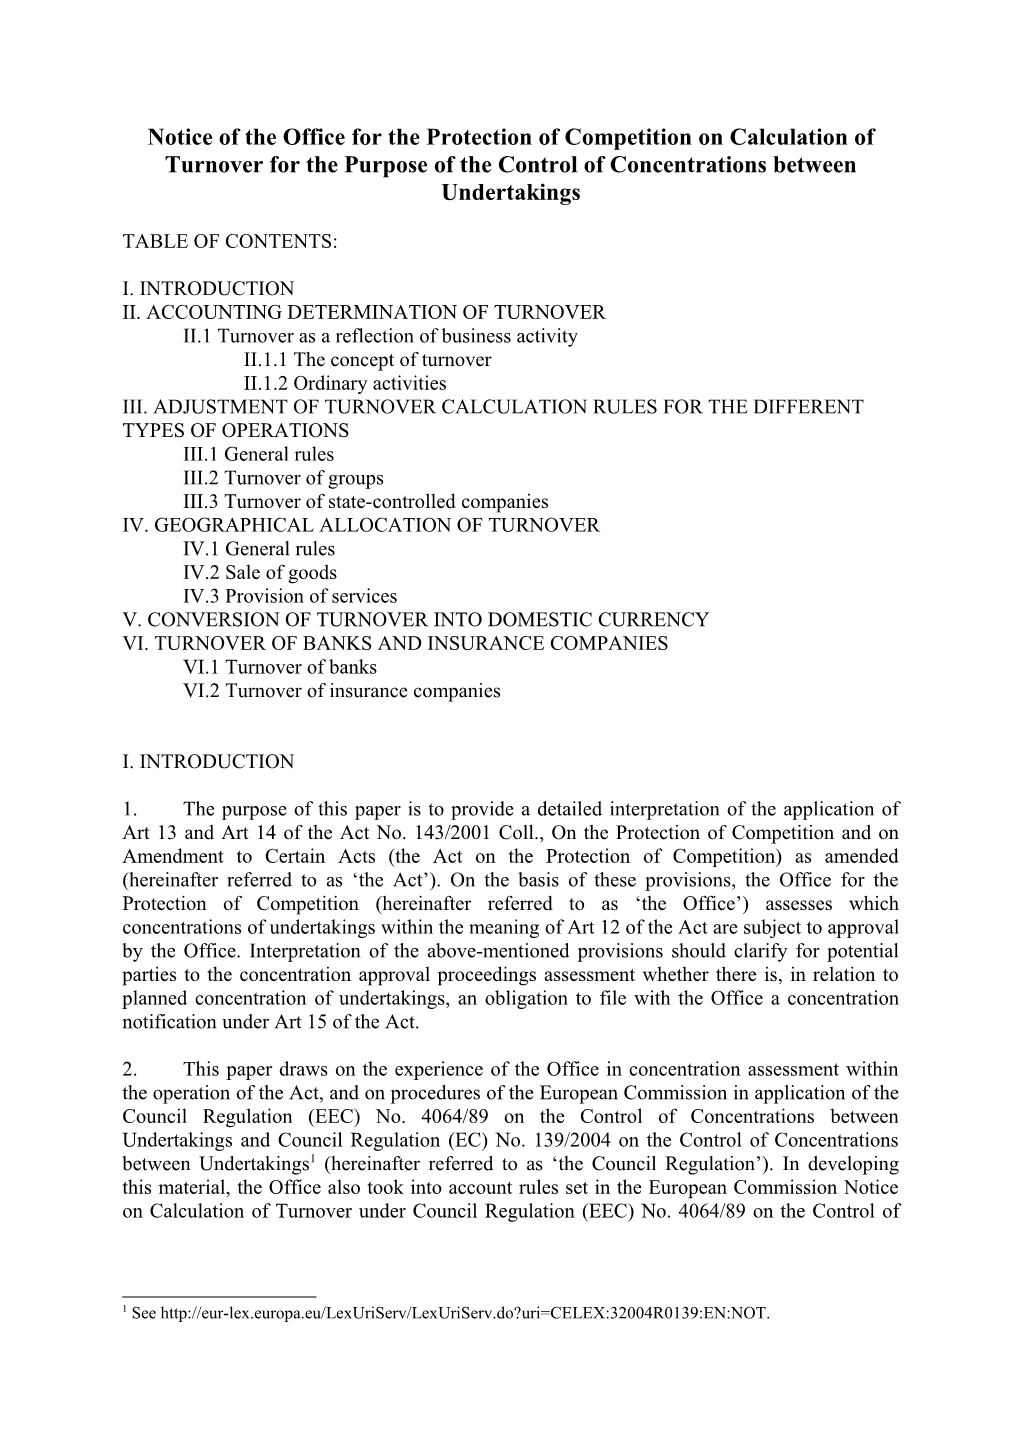 Notice of the Office for the Protection of Competition on Calculation of the Turnover For